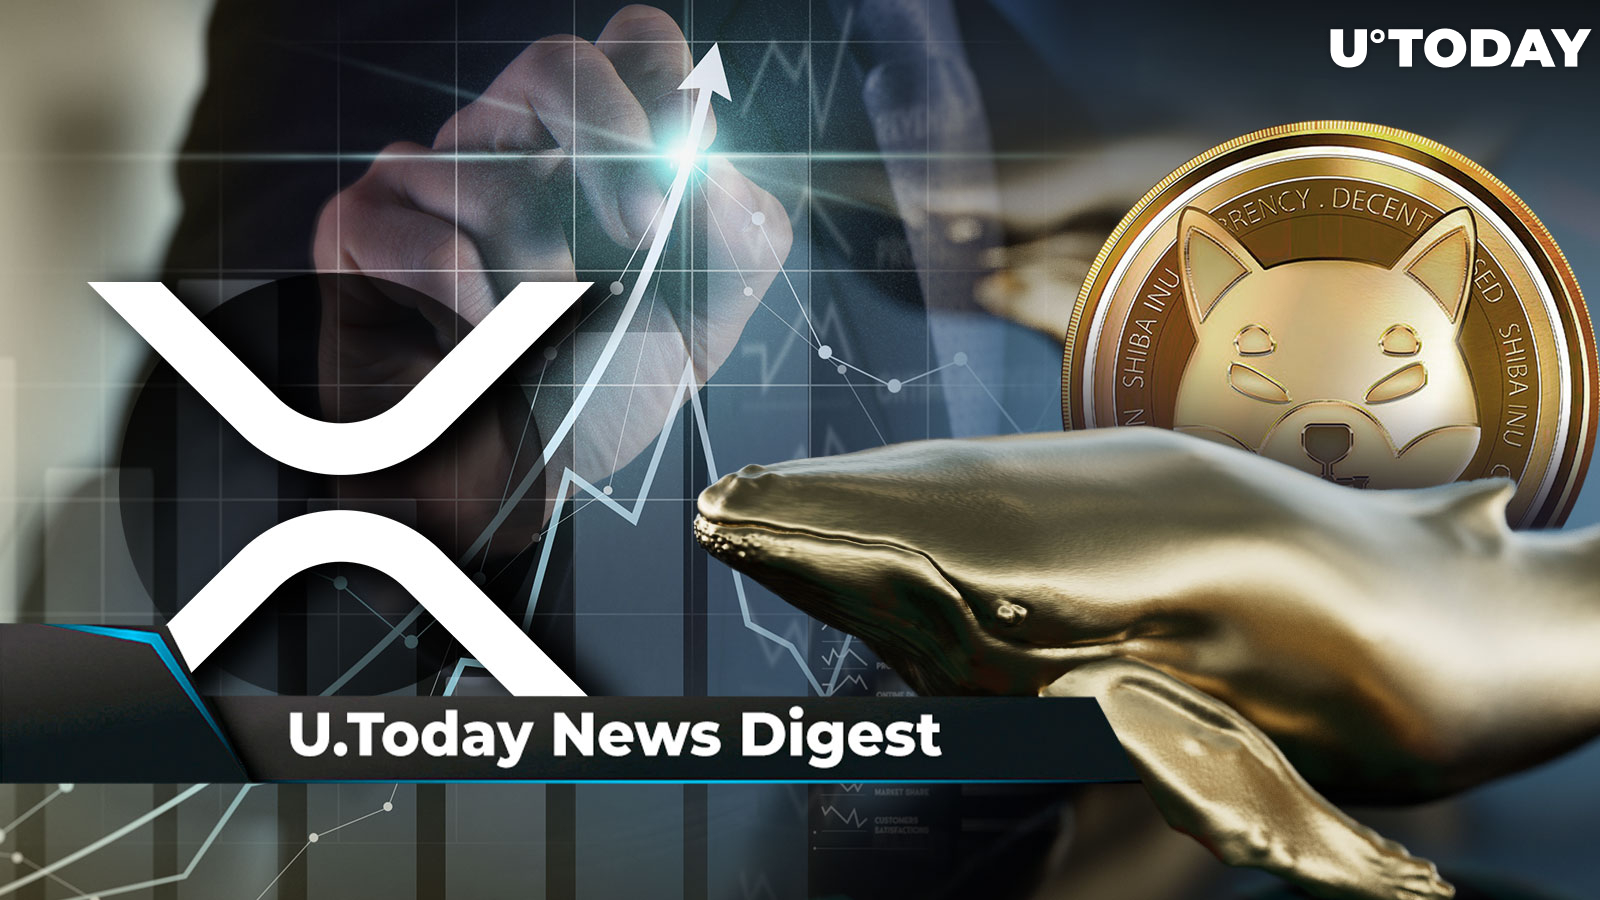 Ripple and SEC Might Settle Their Case, XRP Just Beat Bitcoin, SHIB Whales' Inflow Surges by 3,700%: Crypto News Digest by U.Today